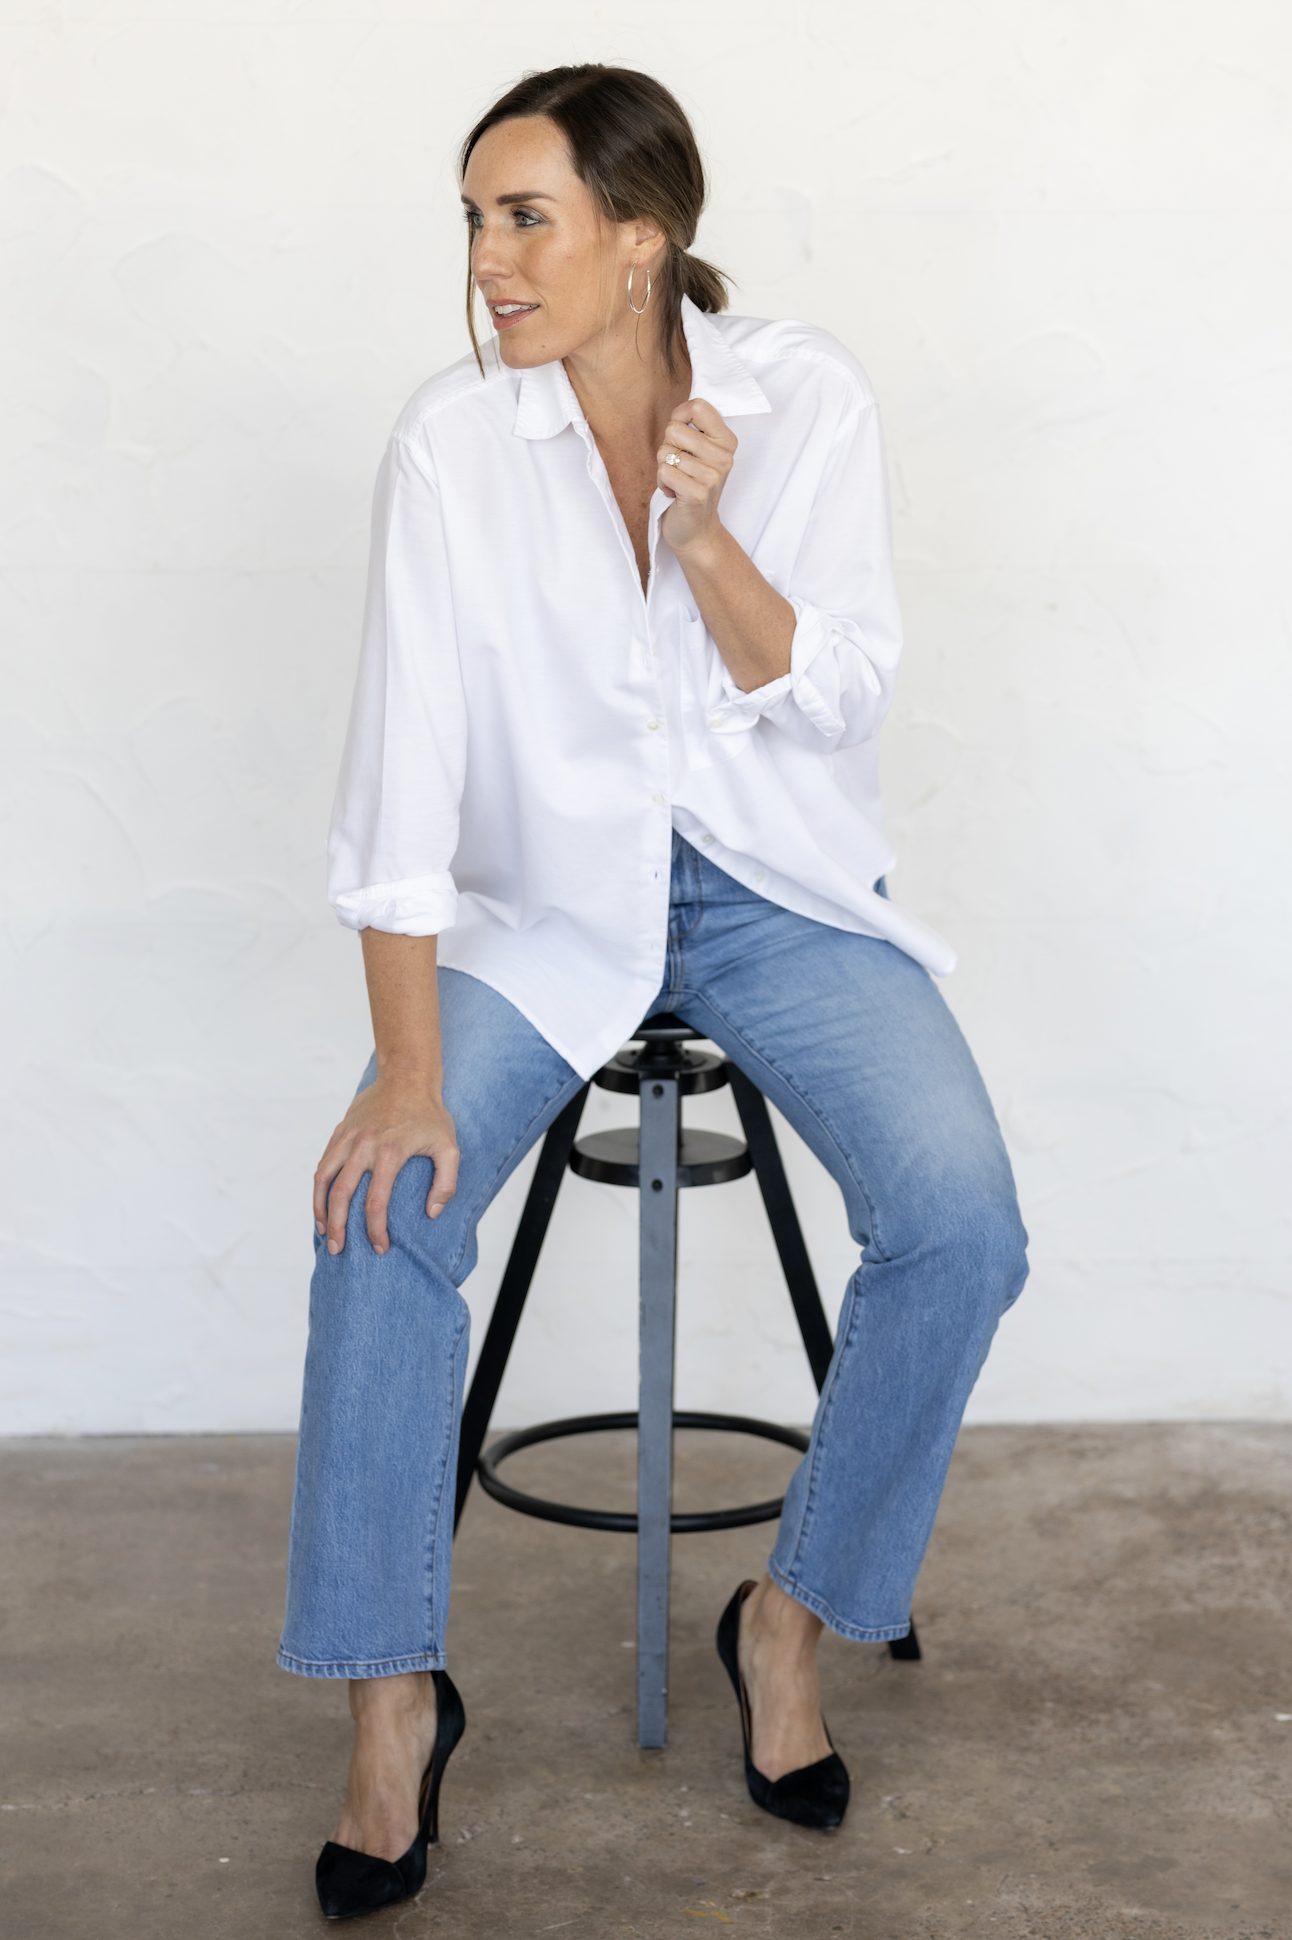 Anne Liebman, founder of SheStylesCo. Wearing classic white button-down shirt.